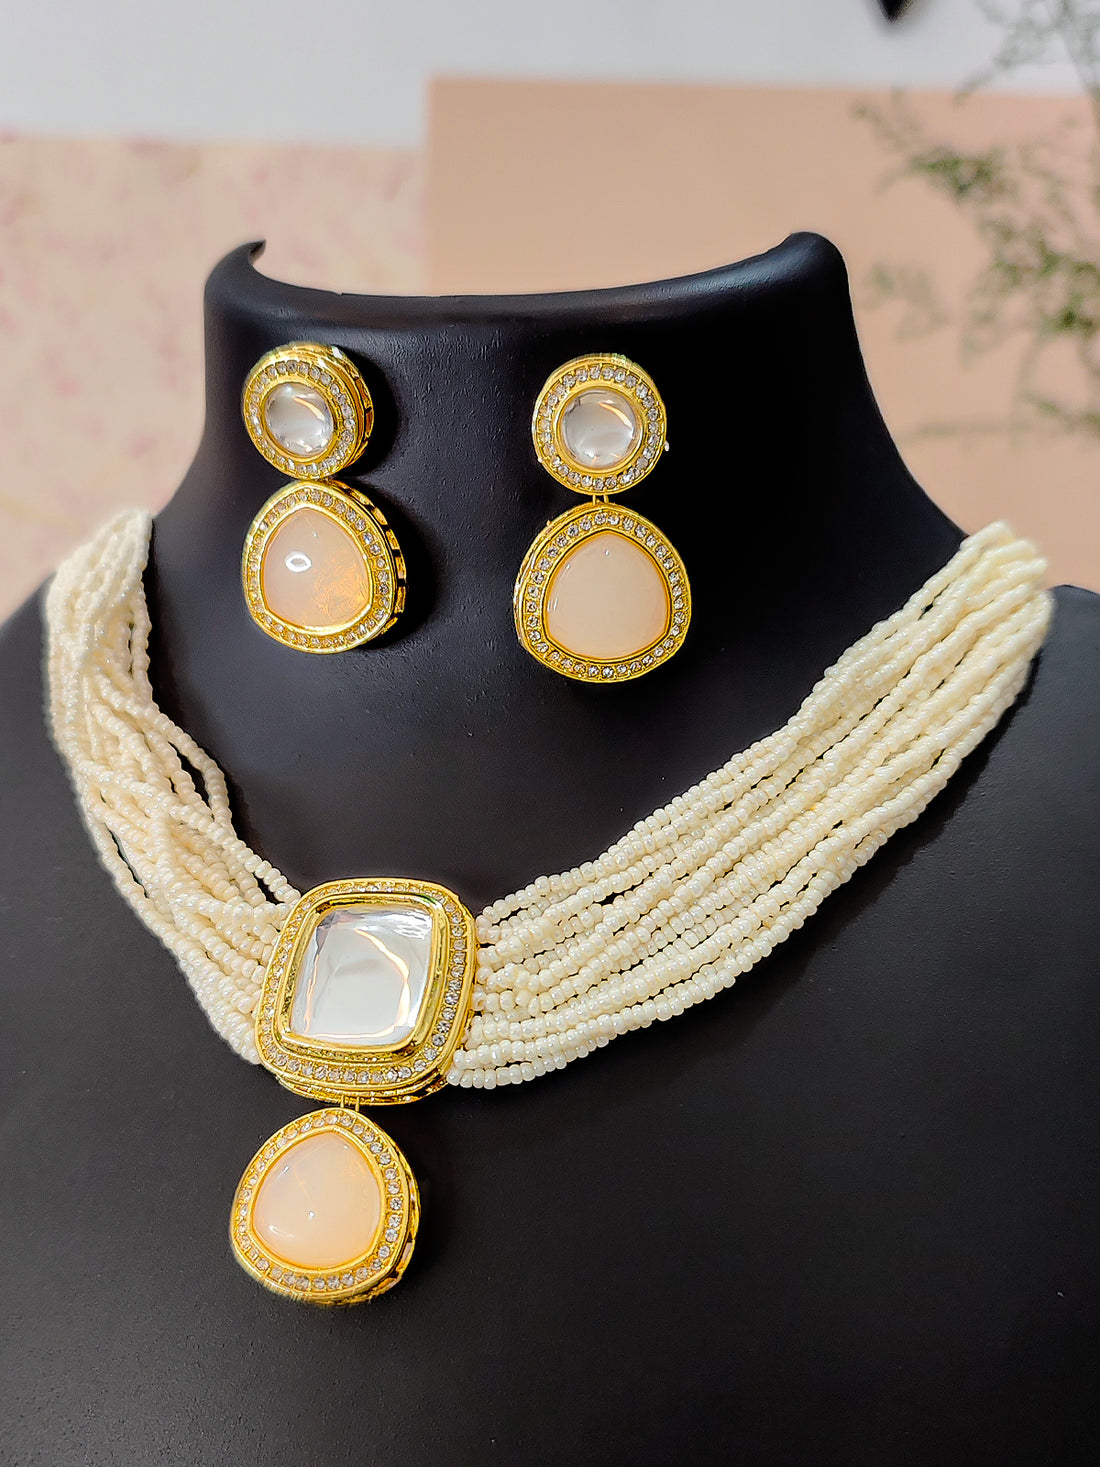 Apaarth Polki Necklace Set | Choker Neckless Set | Off-White Artificial Pearls Band | Best for Weddings, Festivals & Gifting from the house of Mrigaya by Nandini- Gold Finish with Beige Stone - Mrigaya India